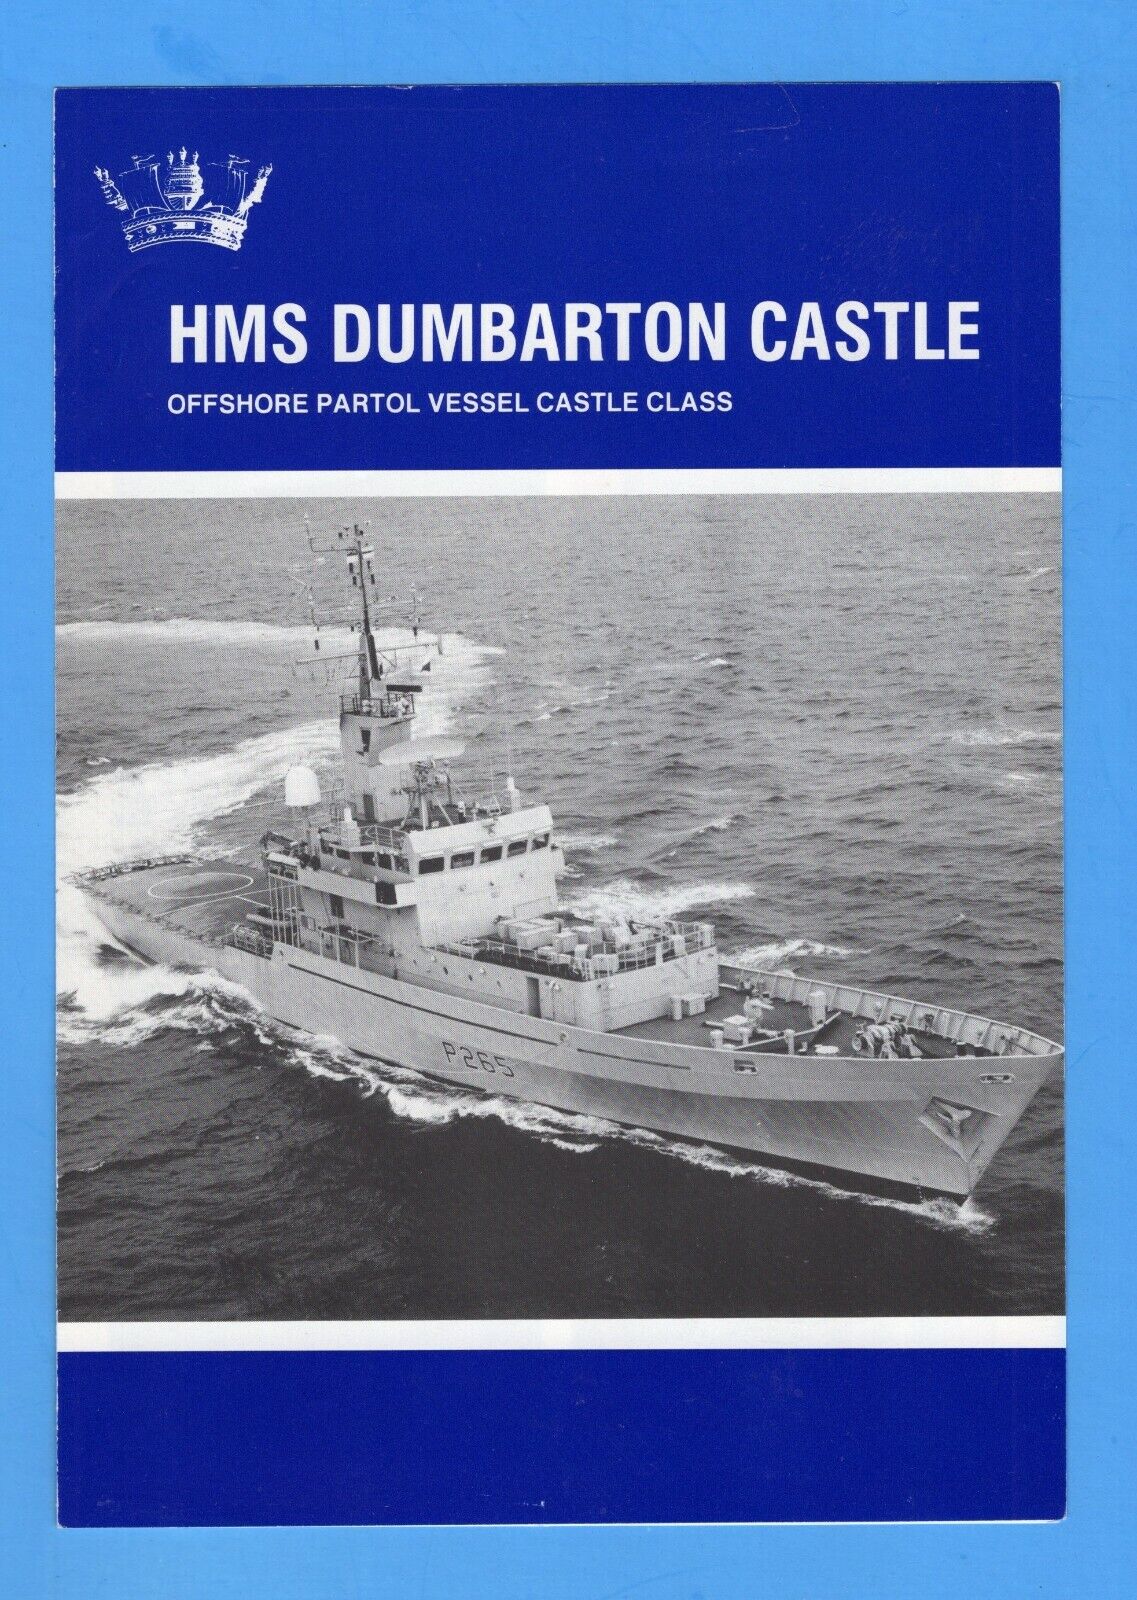 HMS Dumbarton Castle P265 Offshore Patrol Vessel Welcome Aboard Two Inside Pages